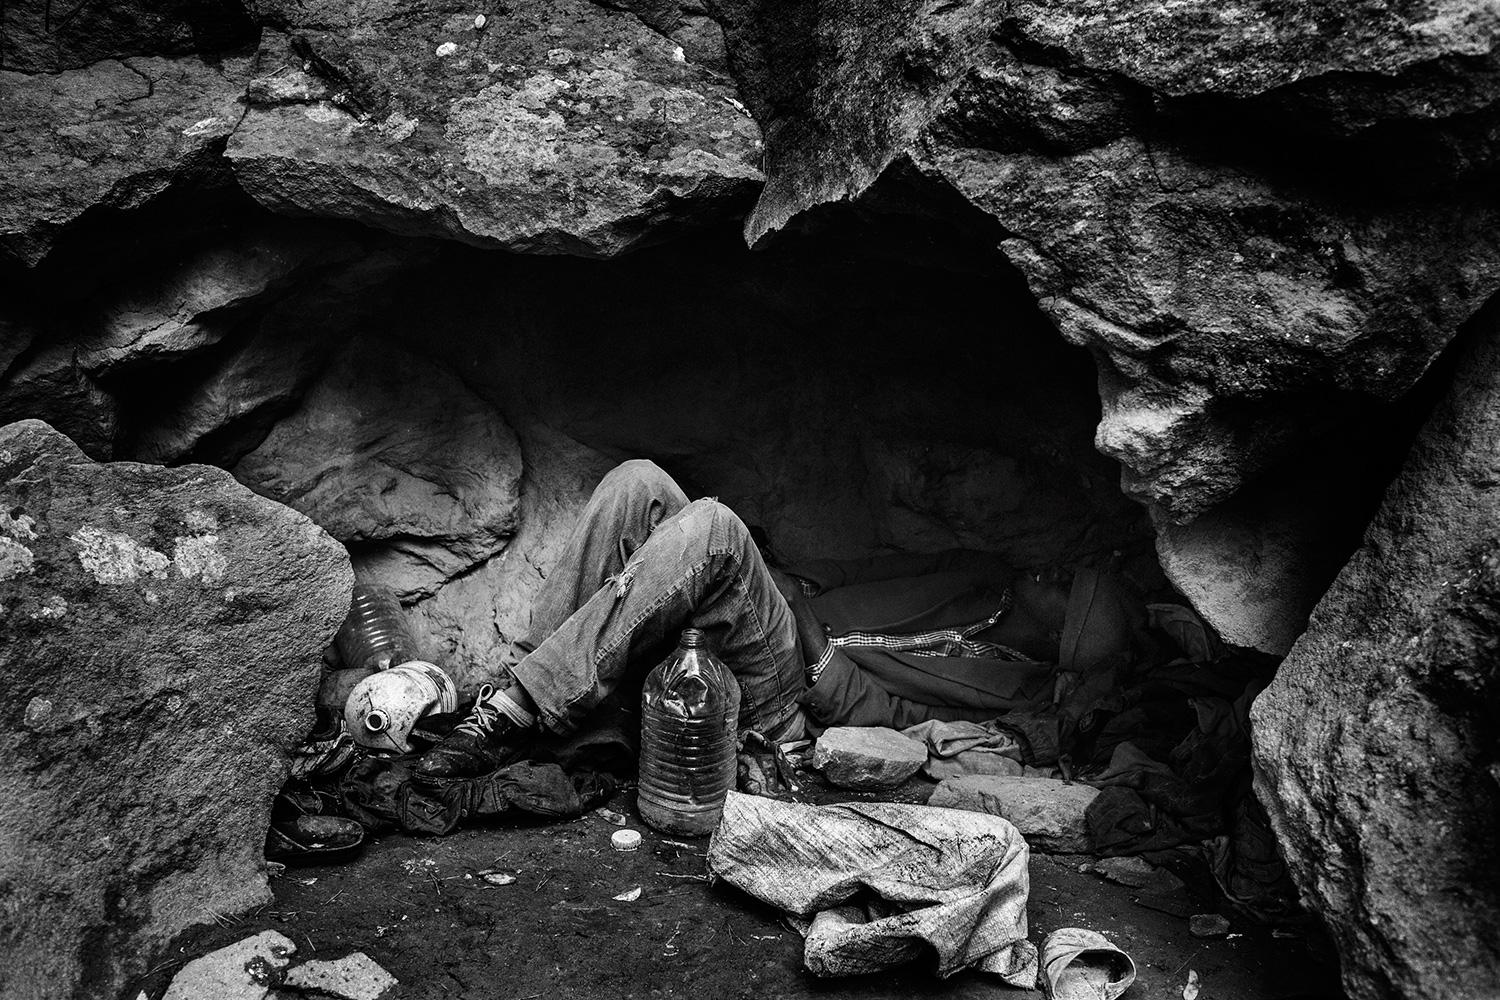 Nador, Morocco, November 2012 – A migrant from Mali lying down in a cave used as shelter. In the forests and mountains that surrounded Nador, groups of Sub-Saharan African migrants survive and wait for the right moment to attempt to cross the border.